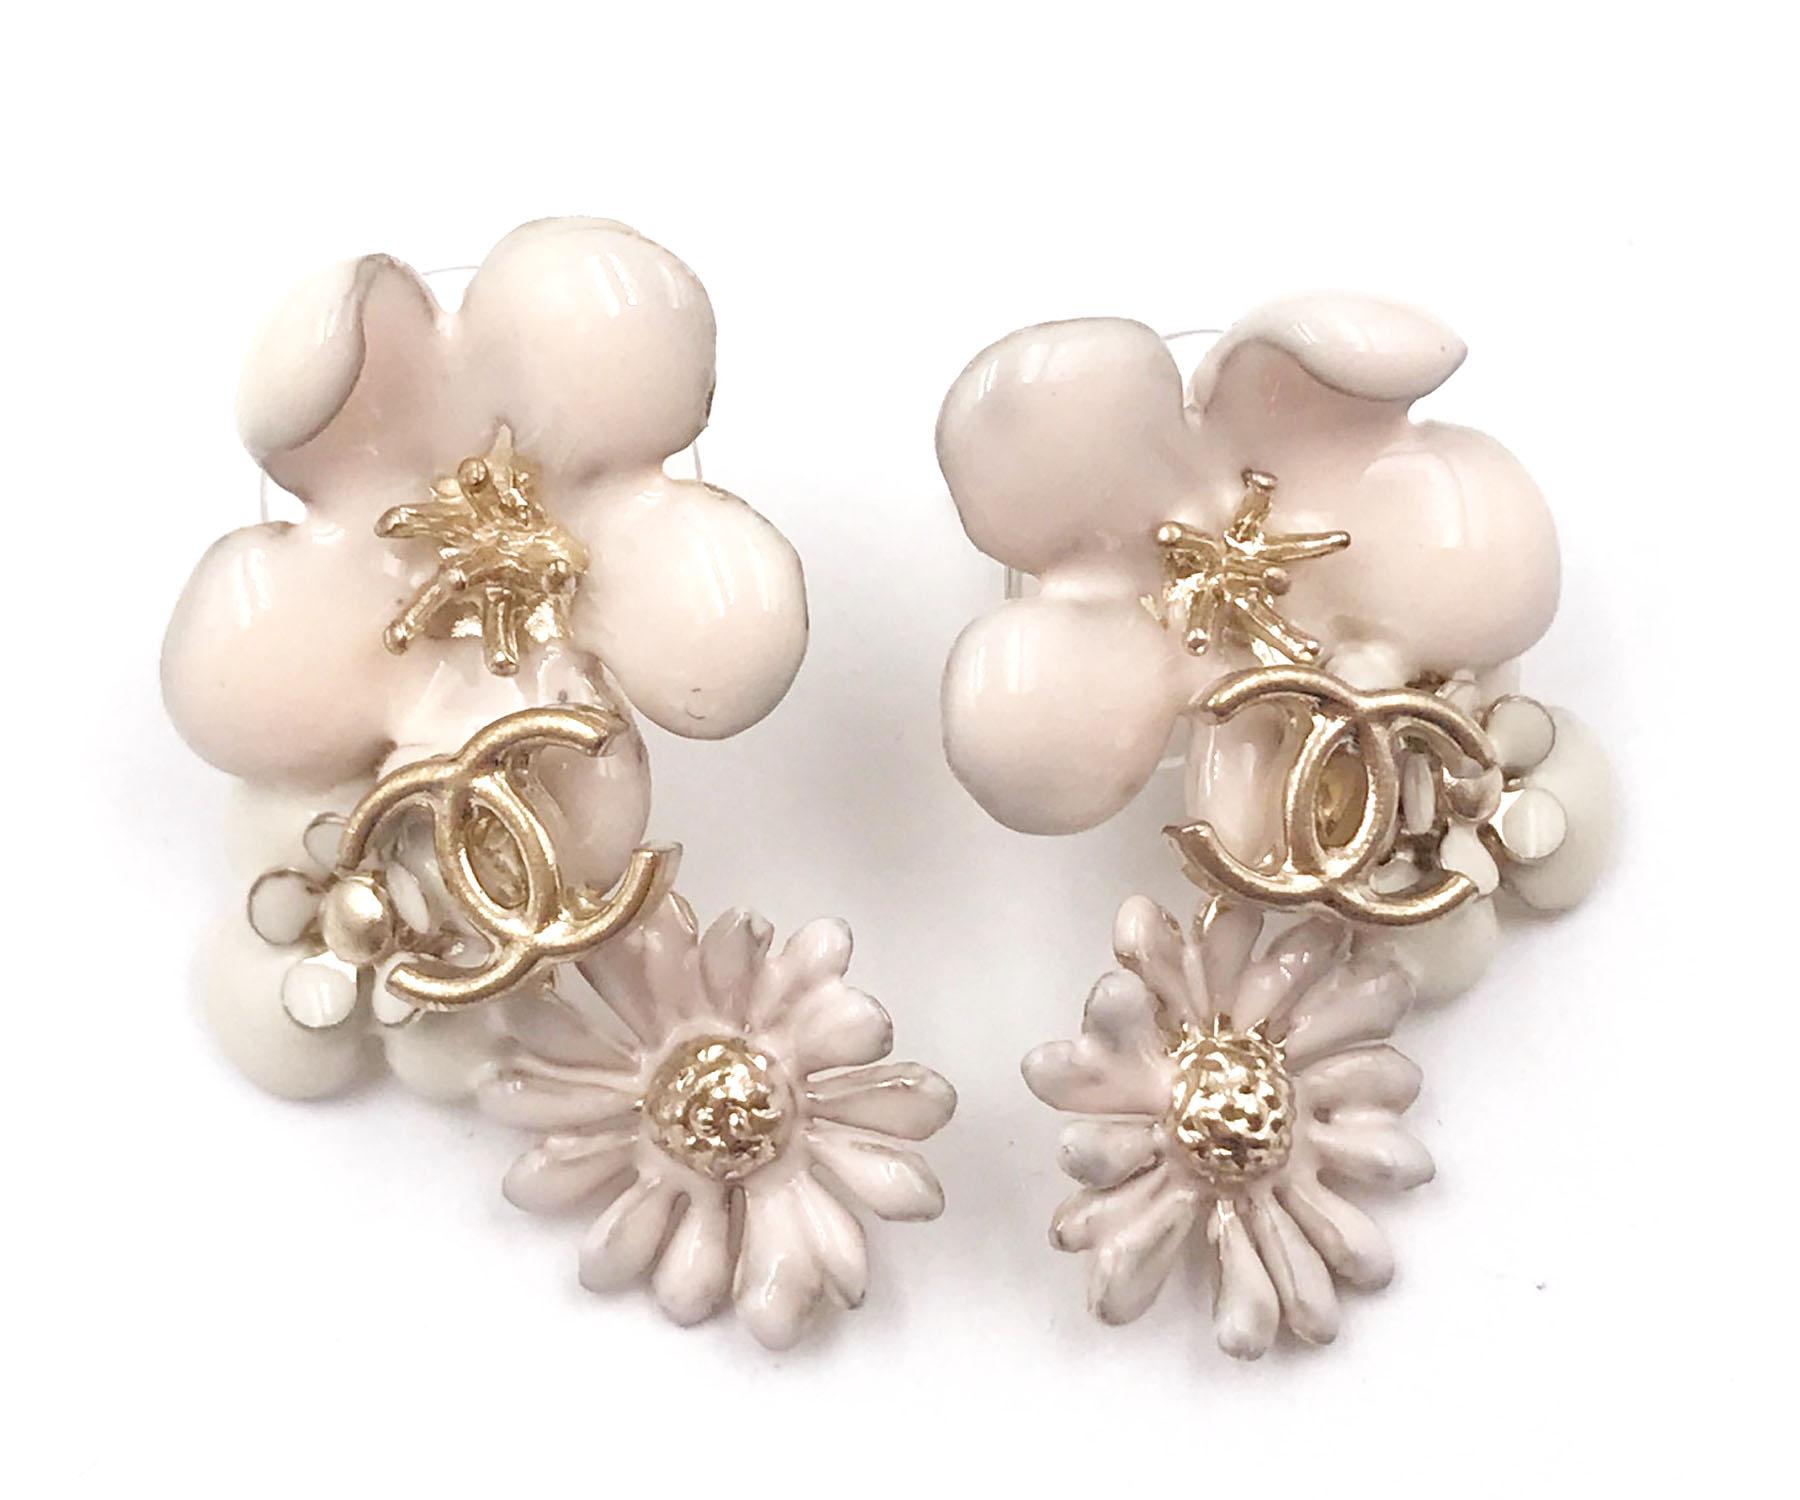 Chanel Gold CC 3 Ivory Flowers Piercing Earrings

*Marked 11
*Made in Italy
*Comes with the original box

-It is approximately 1.1